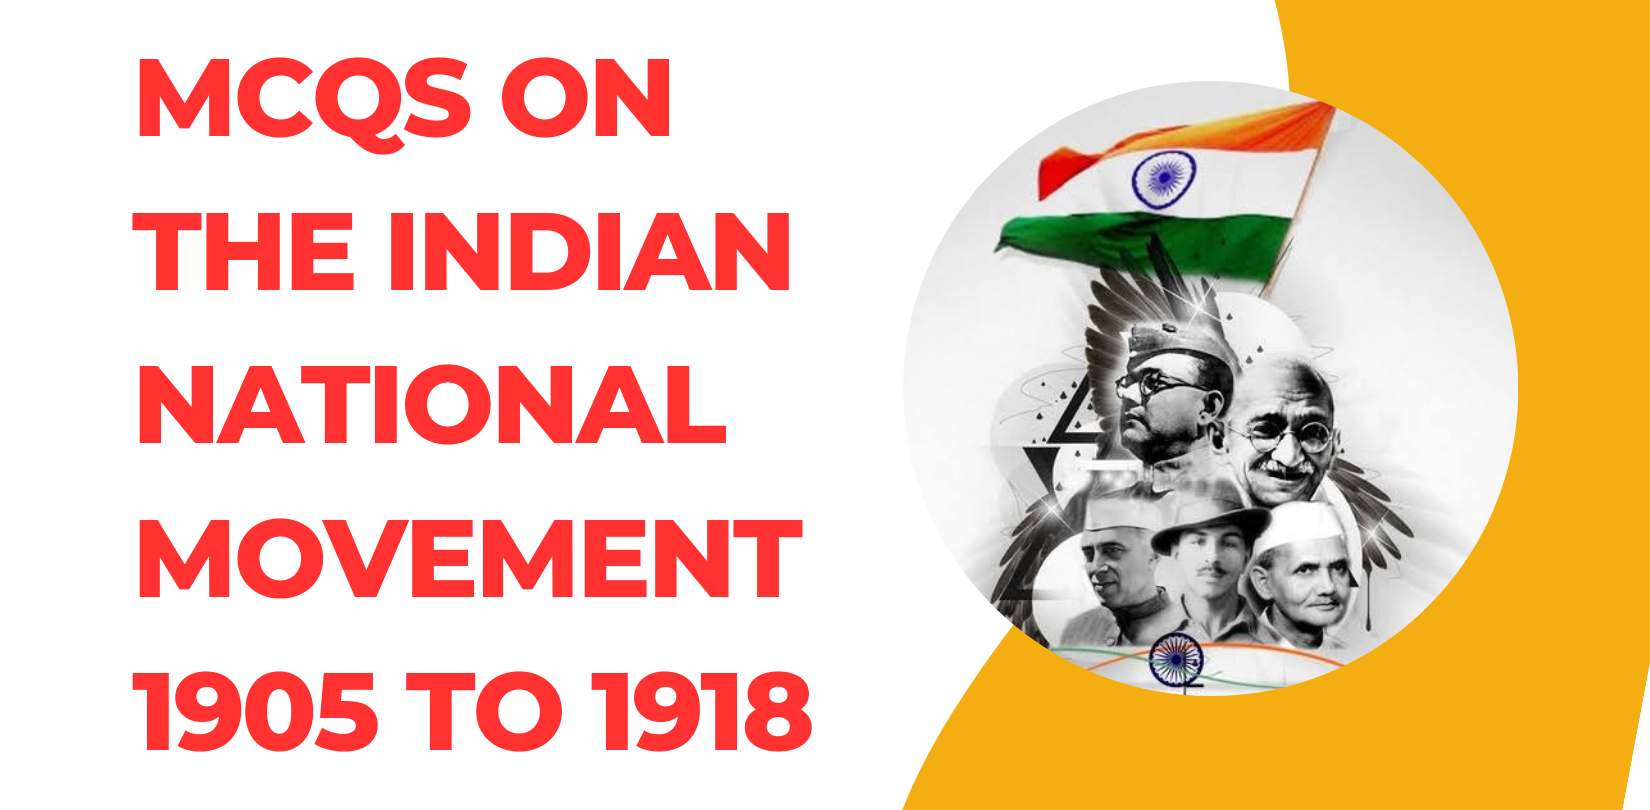 MCQs on the Indian National Movement 1905 to 1918